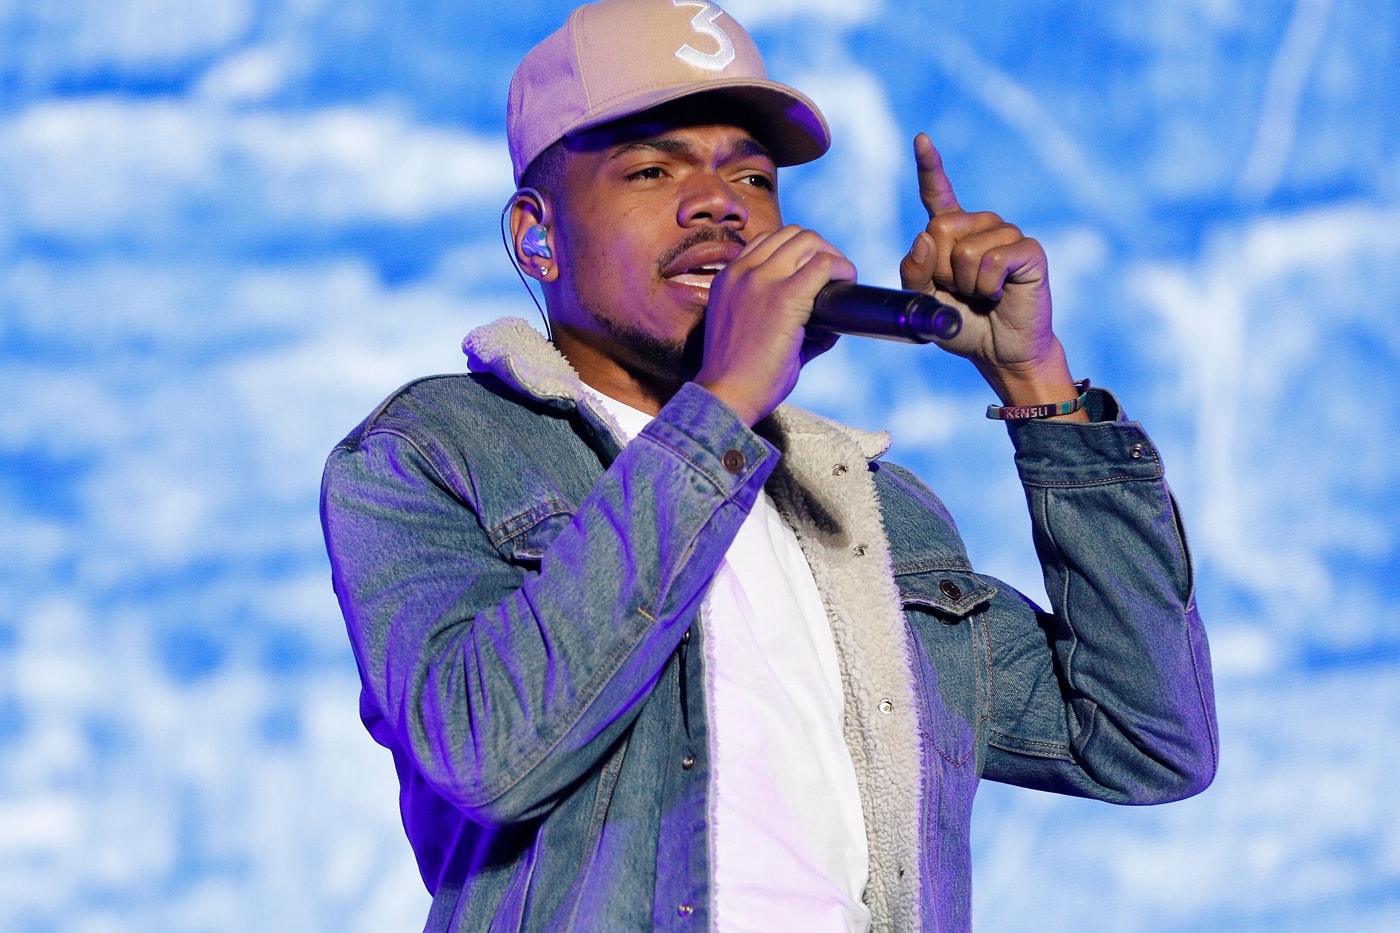 chance-the-rapper-coloring-book-mixtape-stream-chance-3